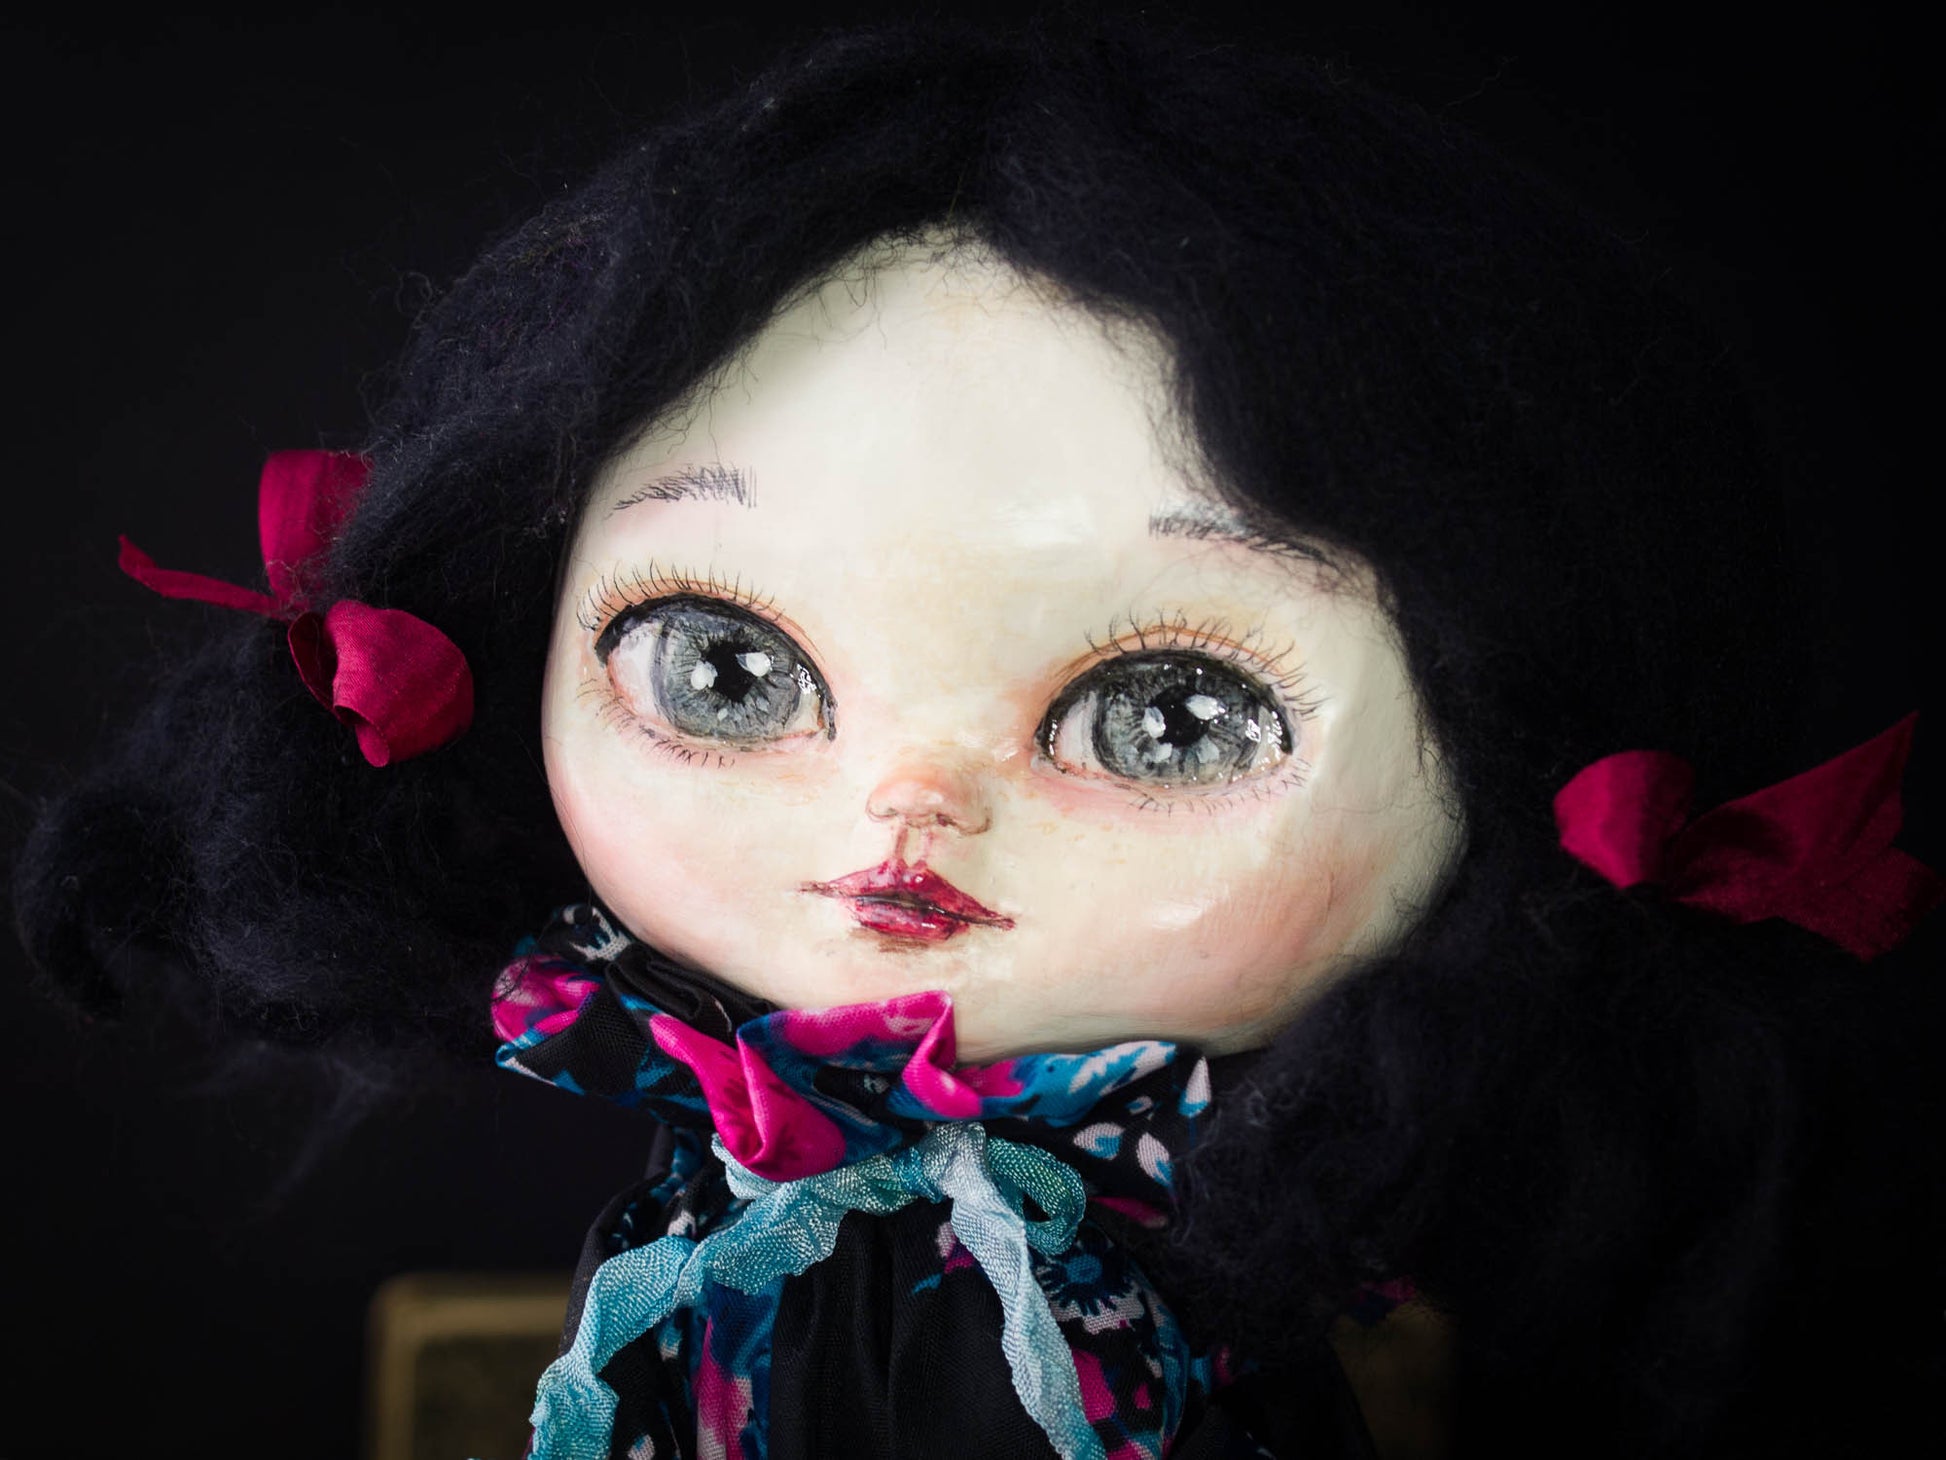 Pauline, a beautiful handmade art doll created by Danita Art with mixed media techniques, fabric and paper clay to create a sweet face with amazingly expressive blue eyes.